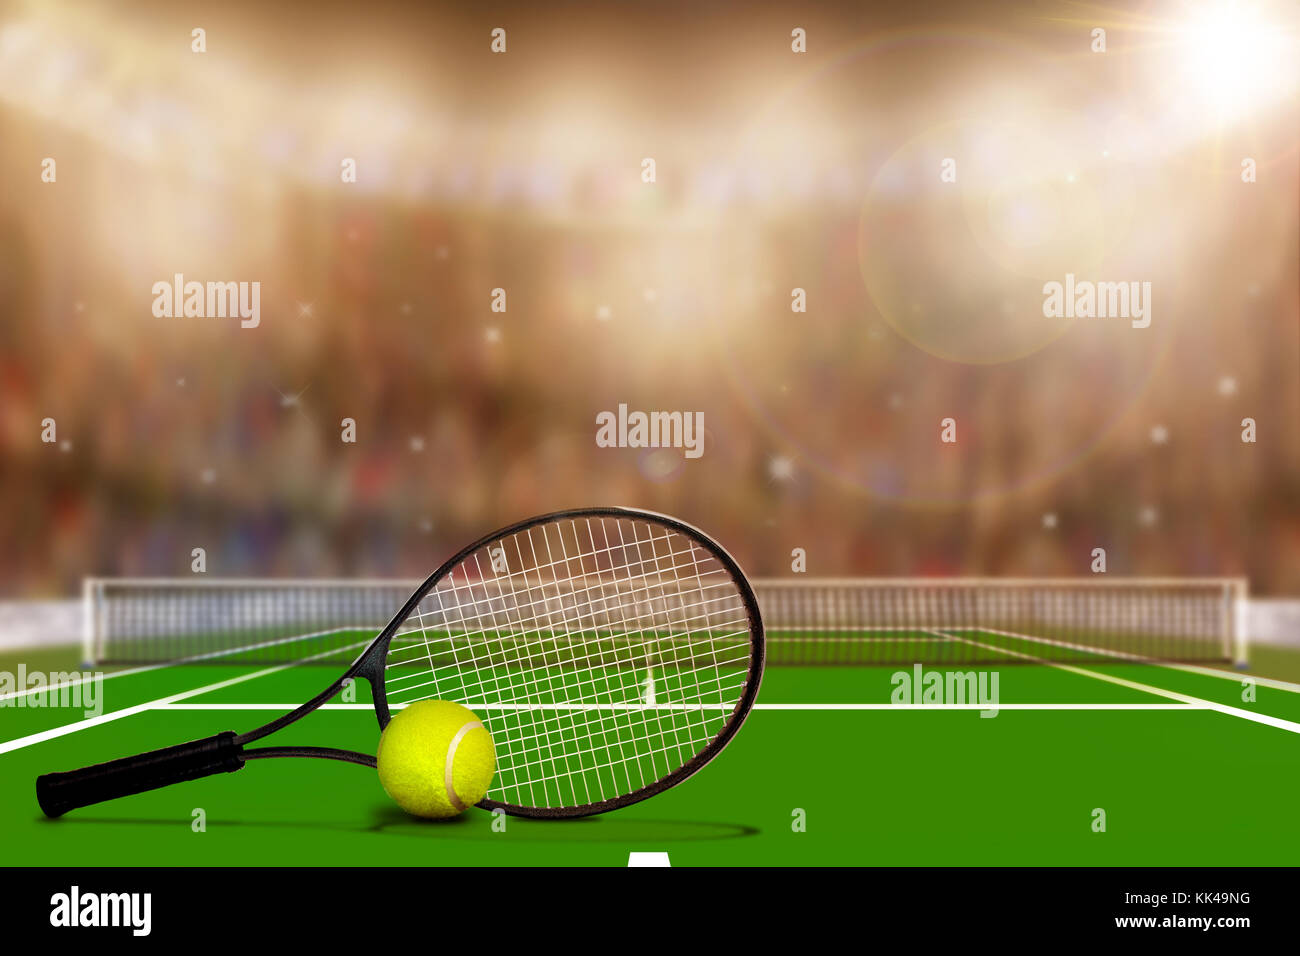 Low angle view of Tennis court full of spectators in the stands with camera flashes and lens flare. Deliberate focus on foreground with copy space. Stock Photo